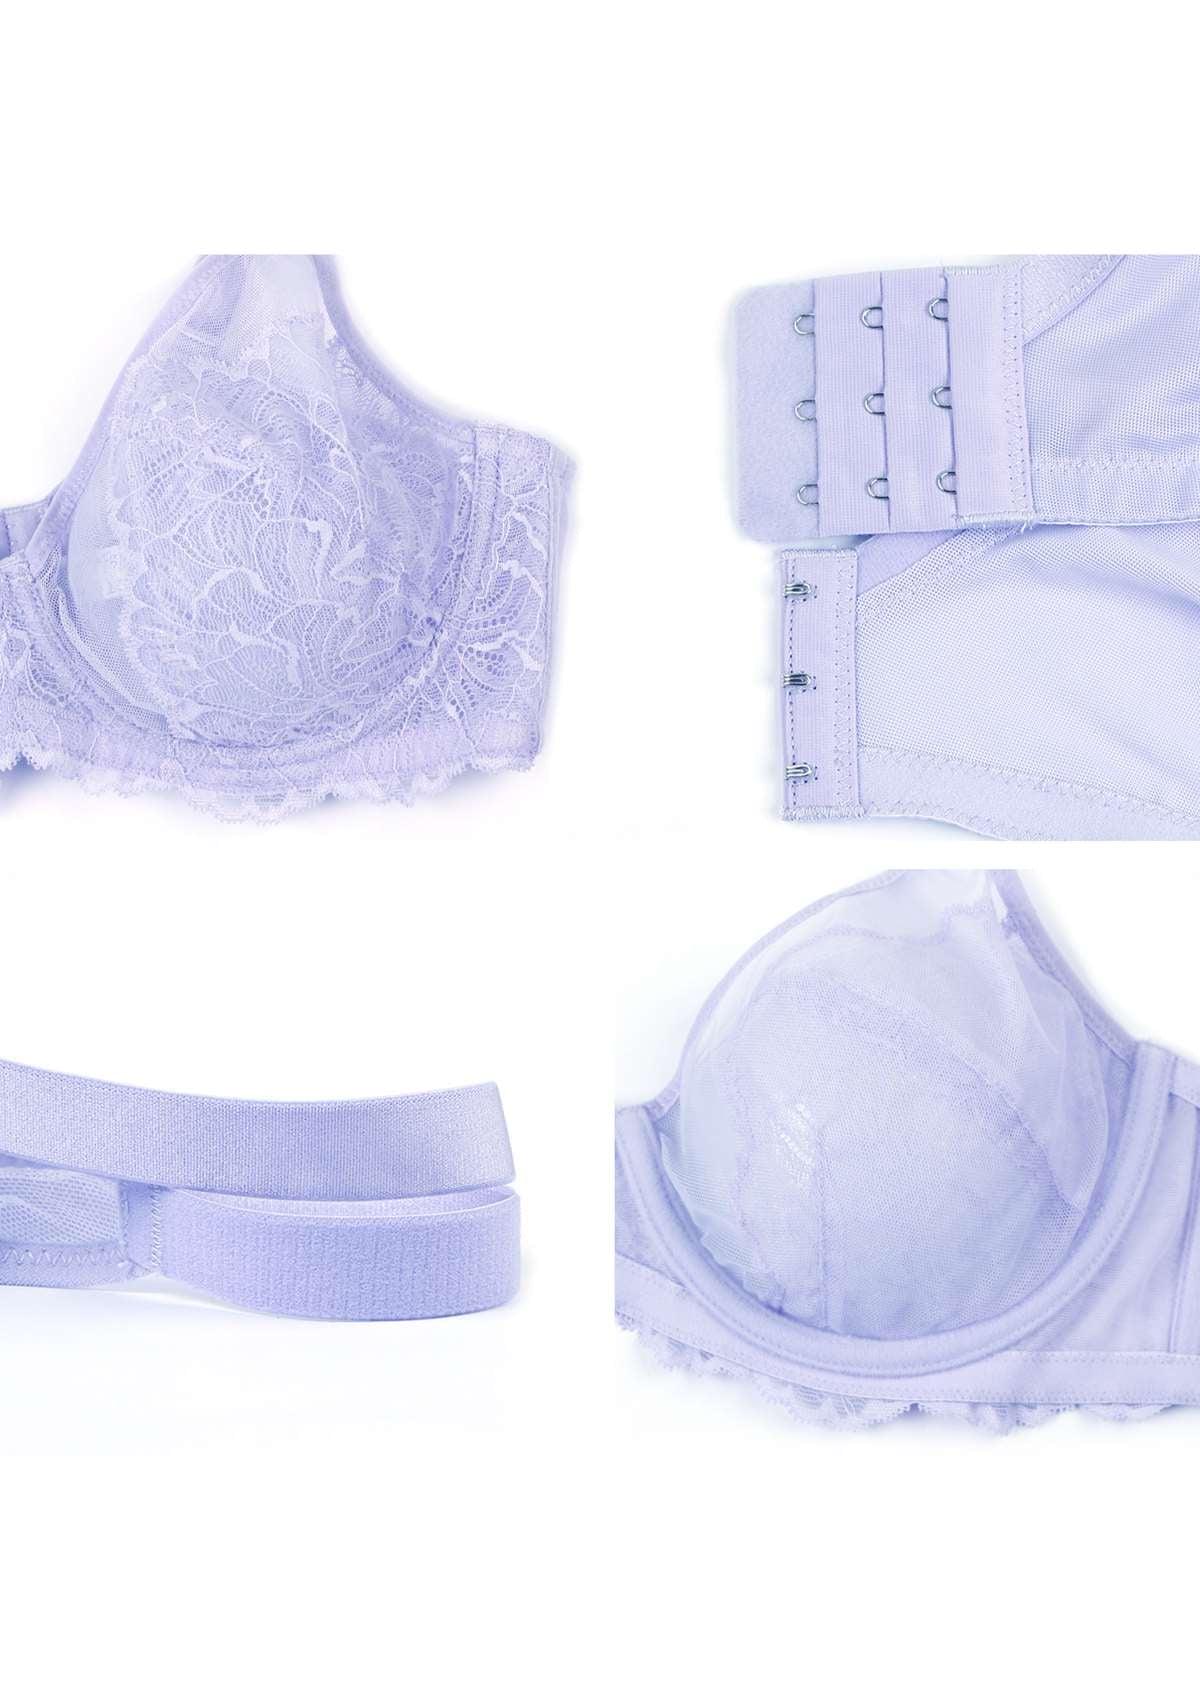 HSIA Blossom Transparent Lace Bra: Plus Size Wired Back Smoothing Bra - Light Purple / 44 / DDD/F